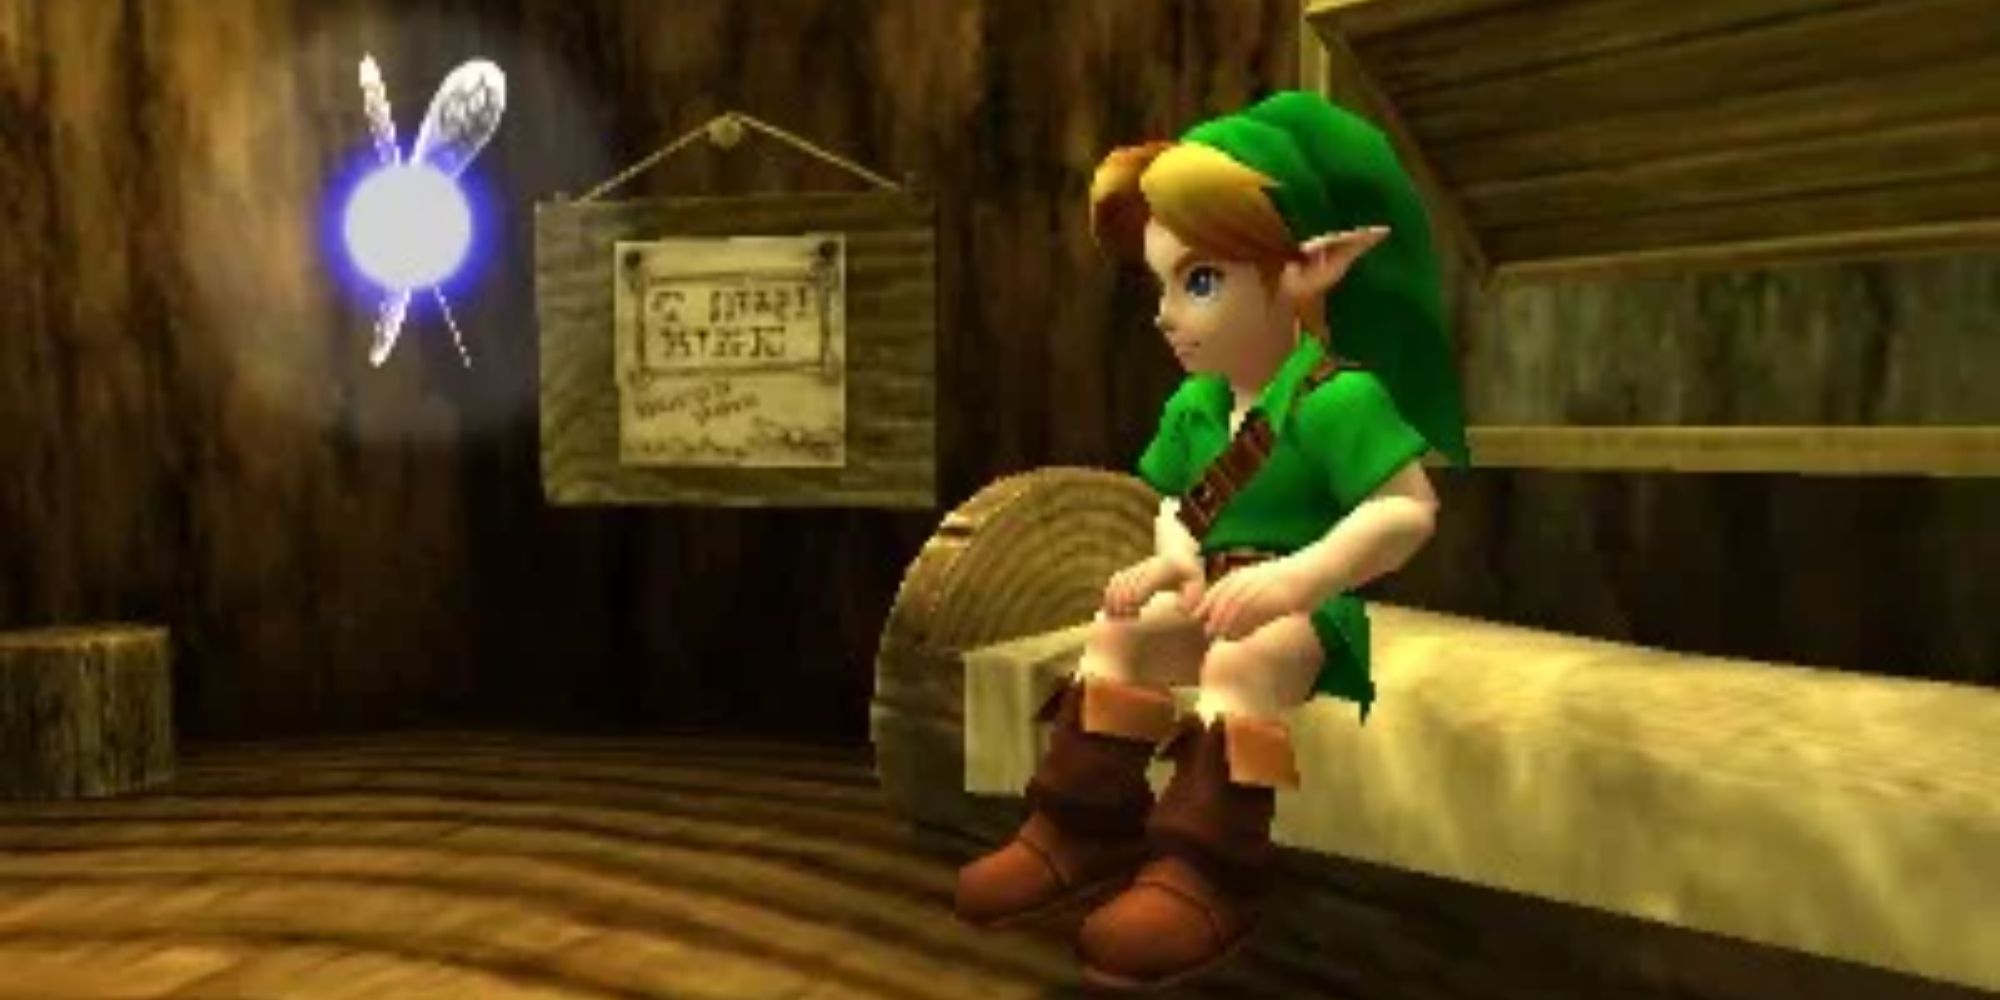 Link meeting Navi in his treehouse